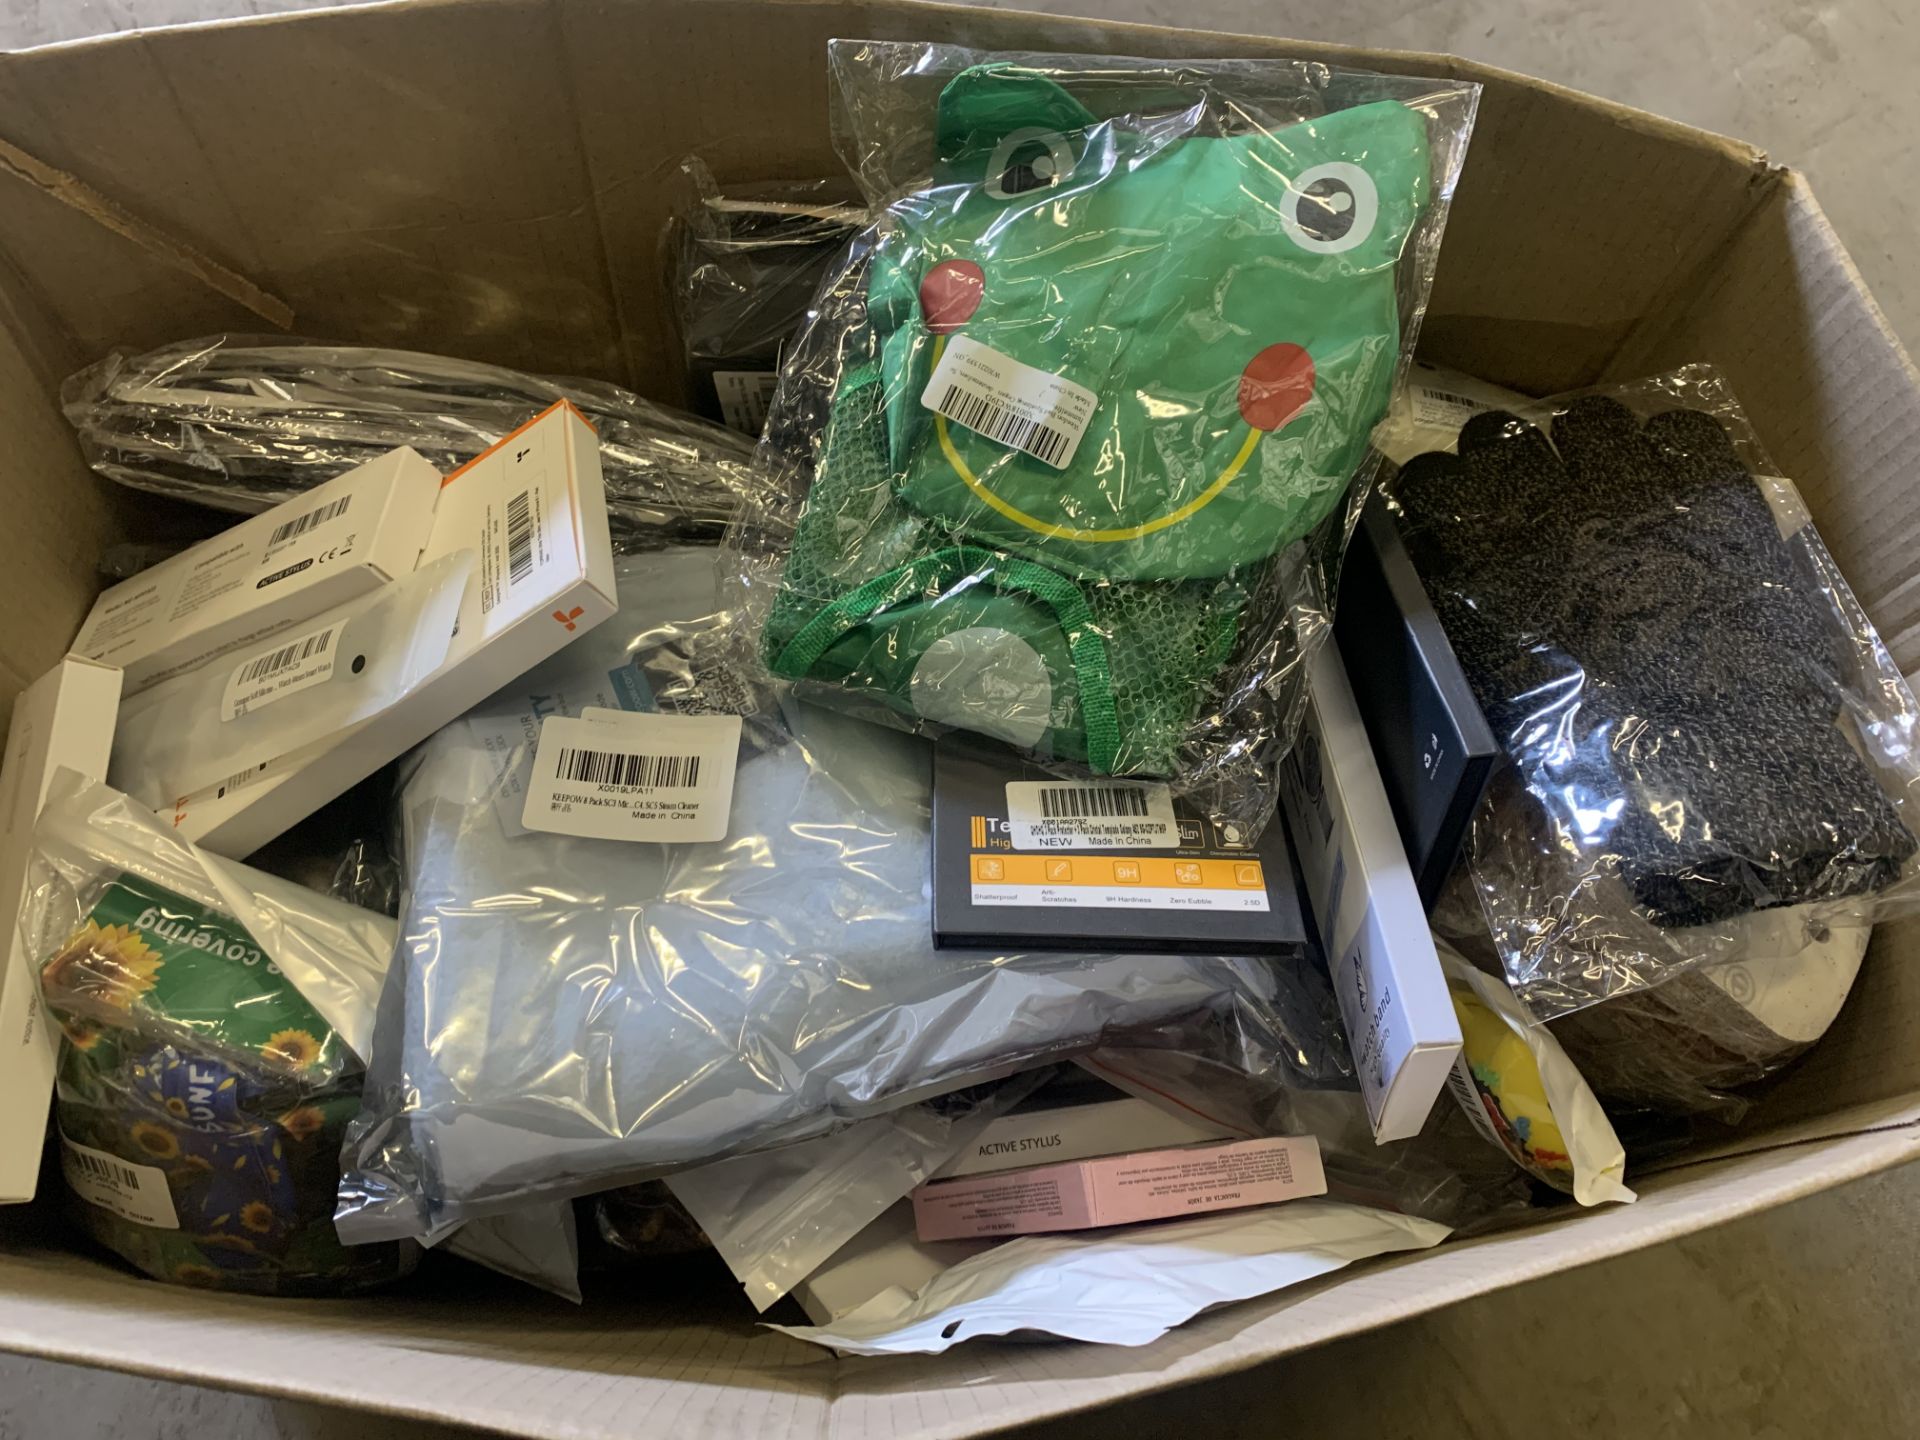 75 PIECE AMAZON END OF LINE LOT INCLUDING SANDING PAPER, GLOVES, PHONE CHARGERS, PHONE ACCESSORIES